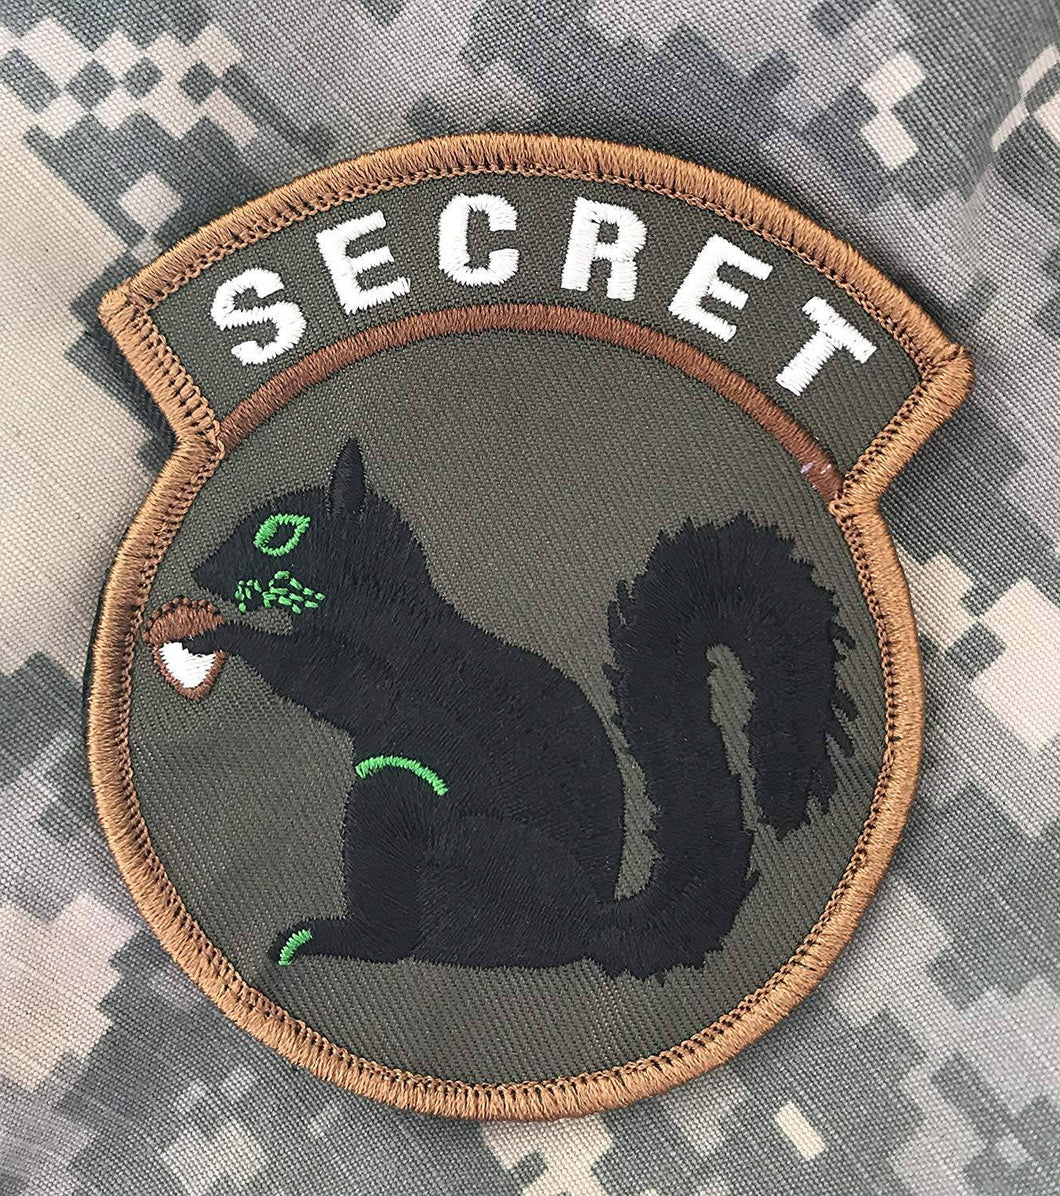 BuckUp Tactical Morale Patch Hook Secret Squirrel Forest Patches 3